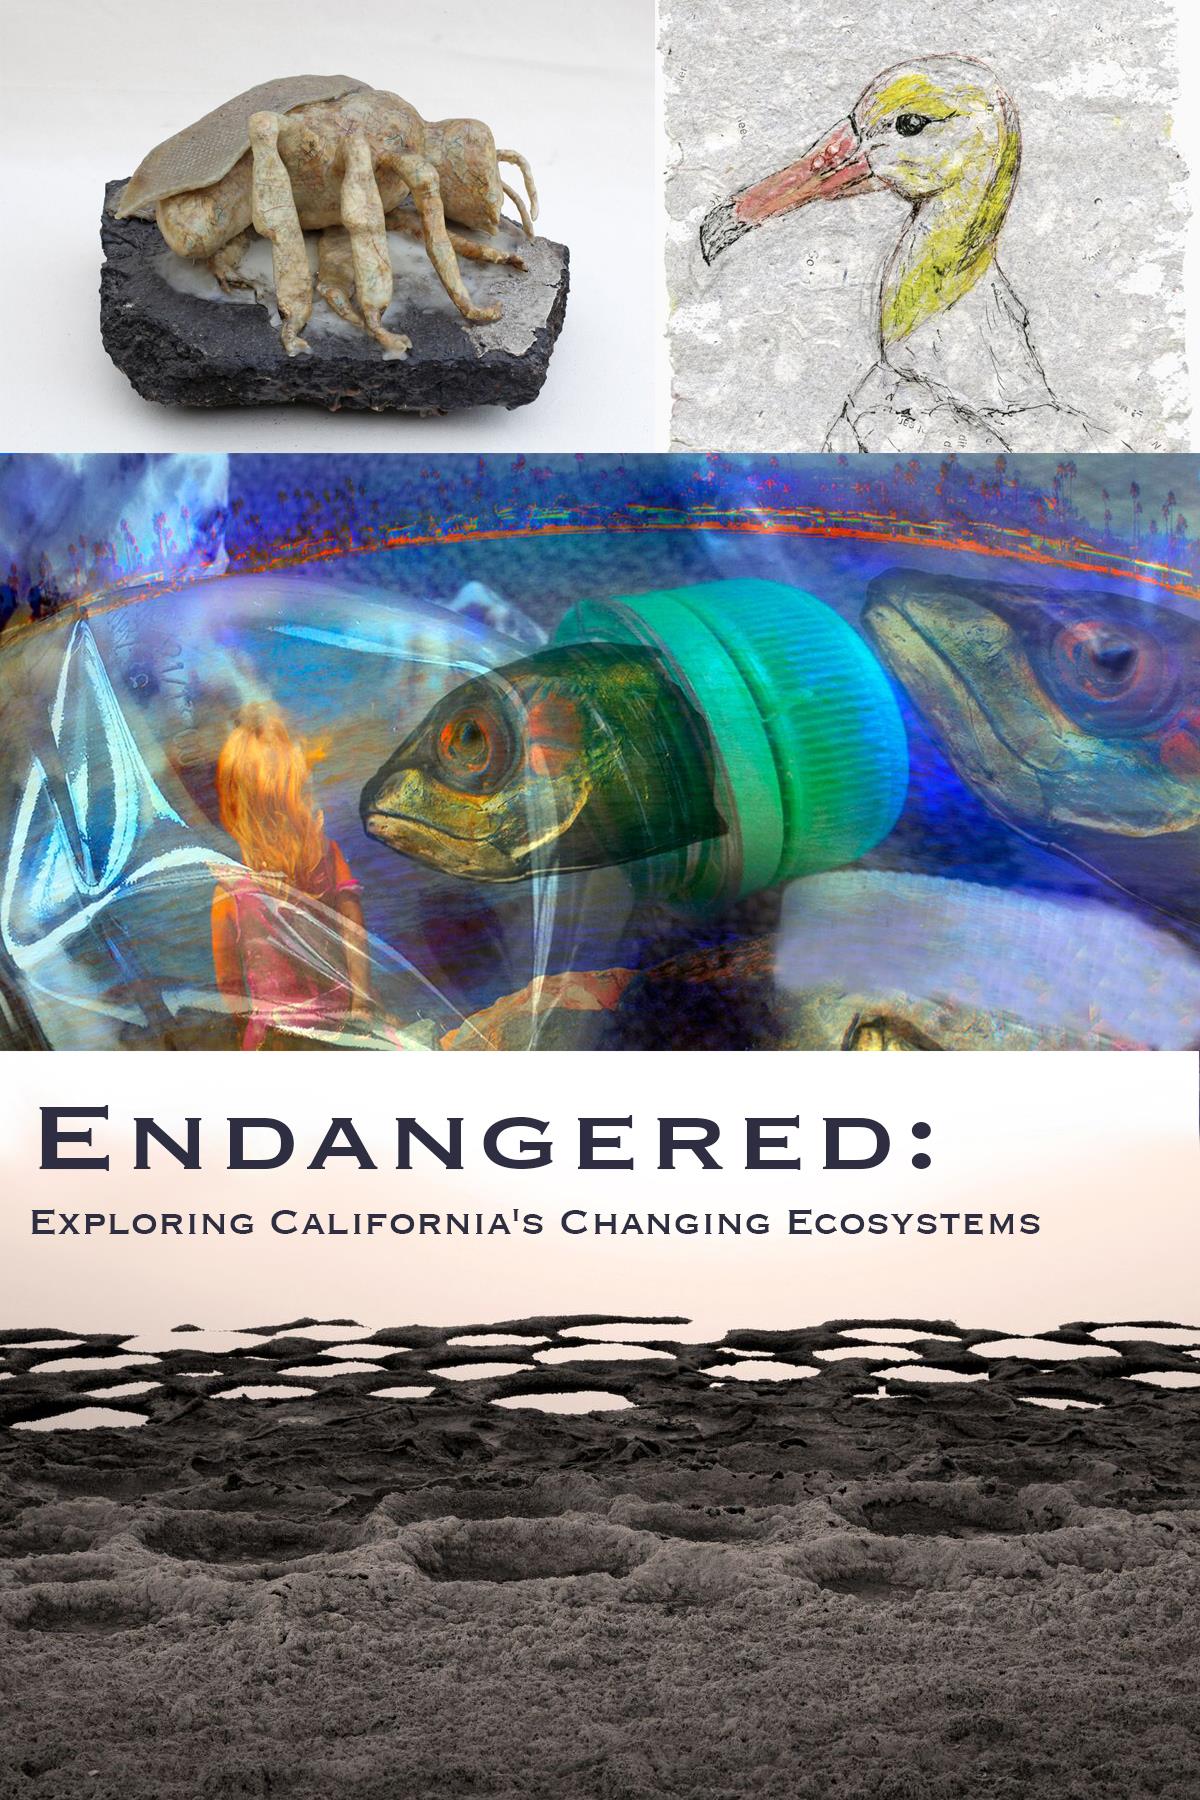 Endangered: Exploring California's Changing Ecosystems